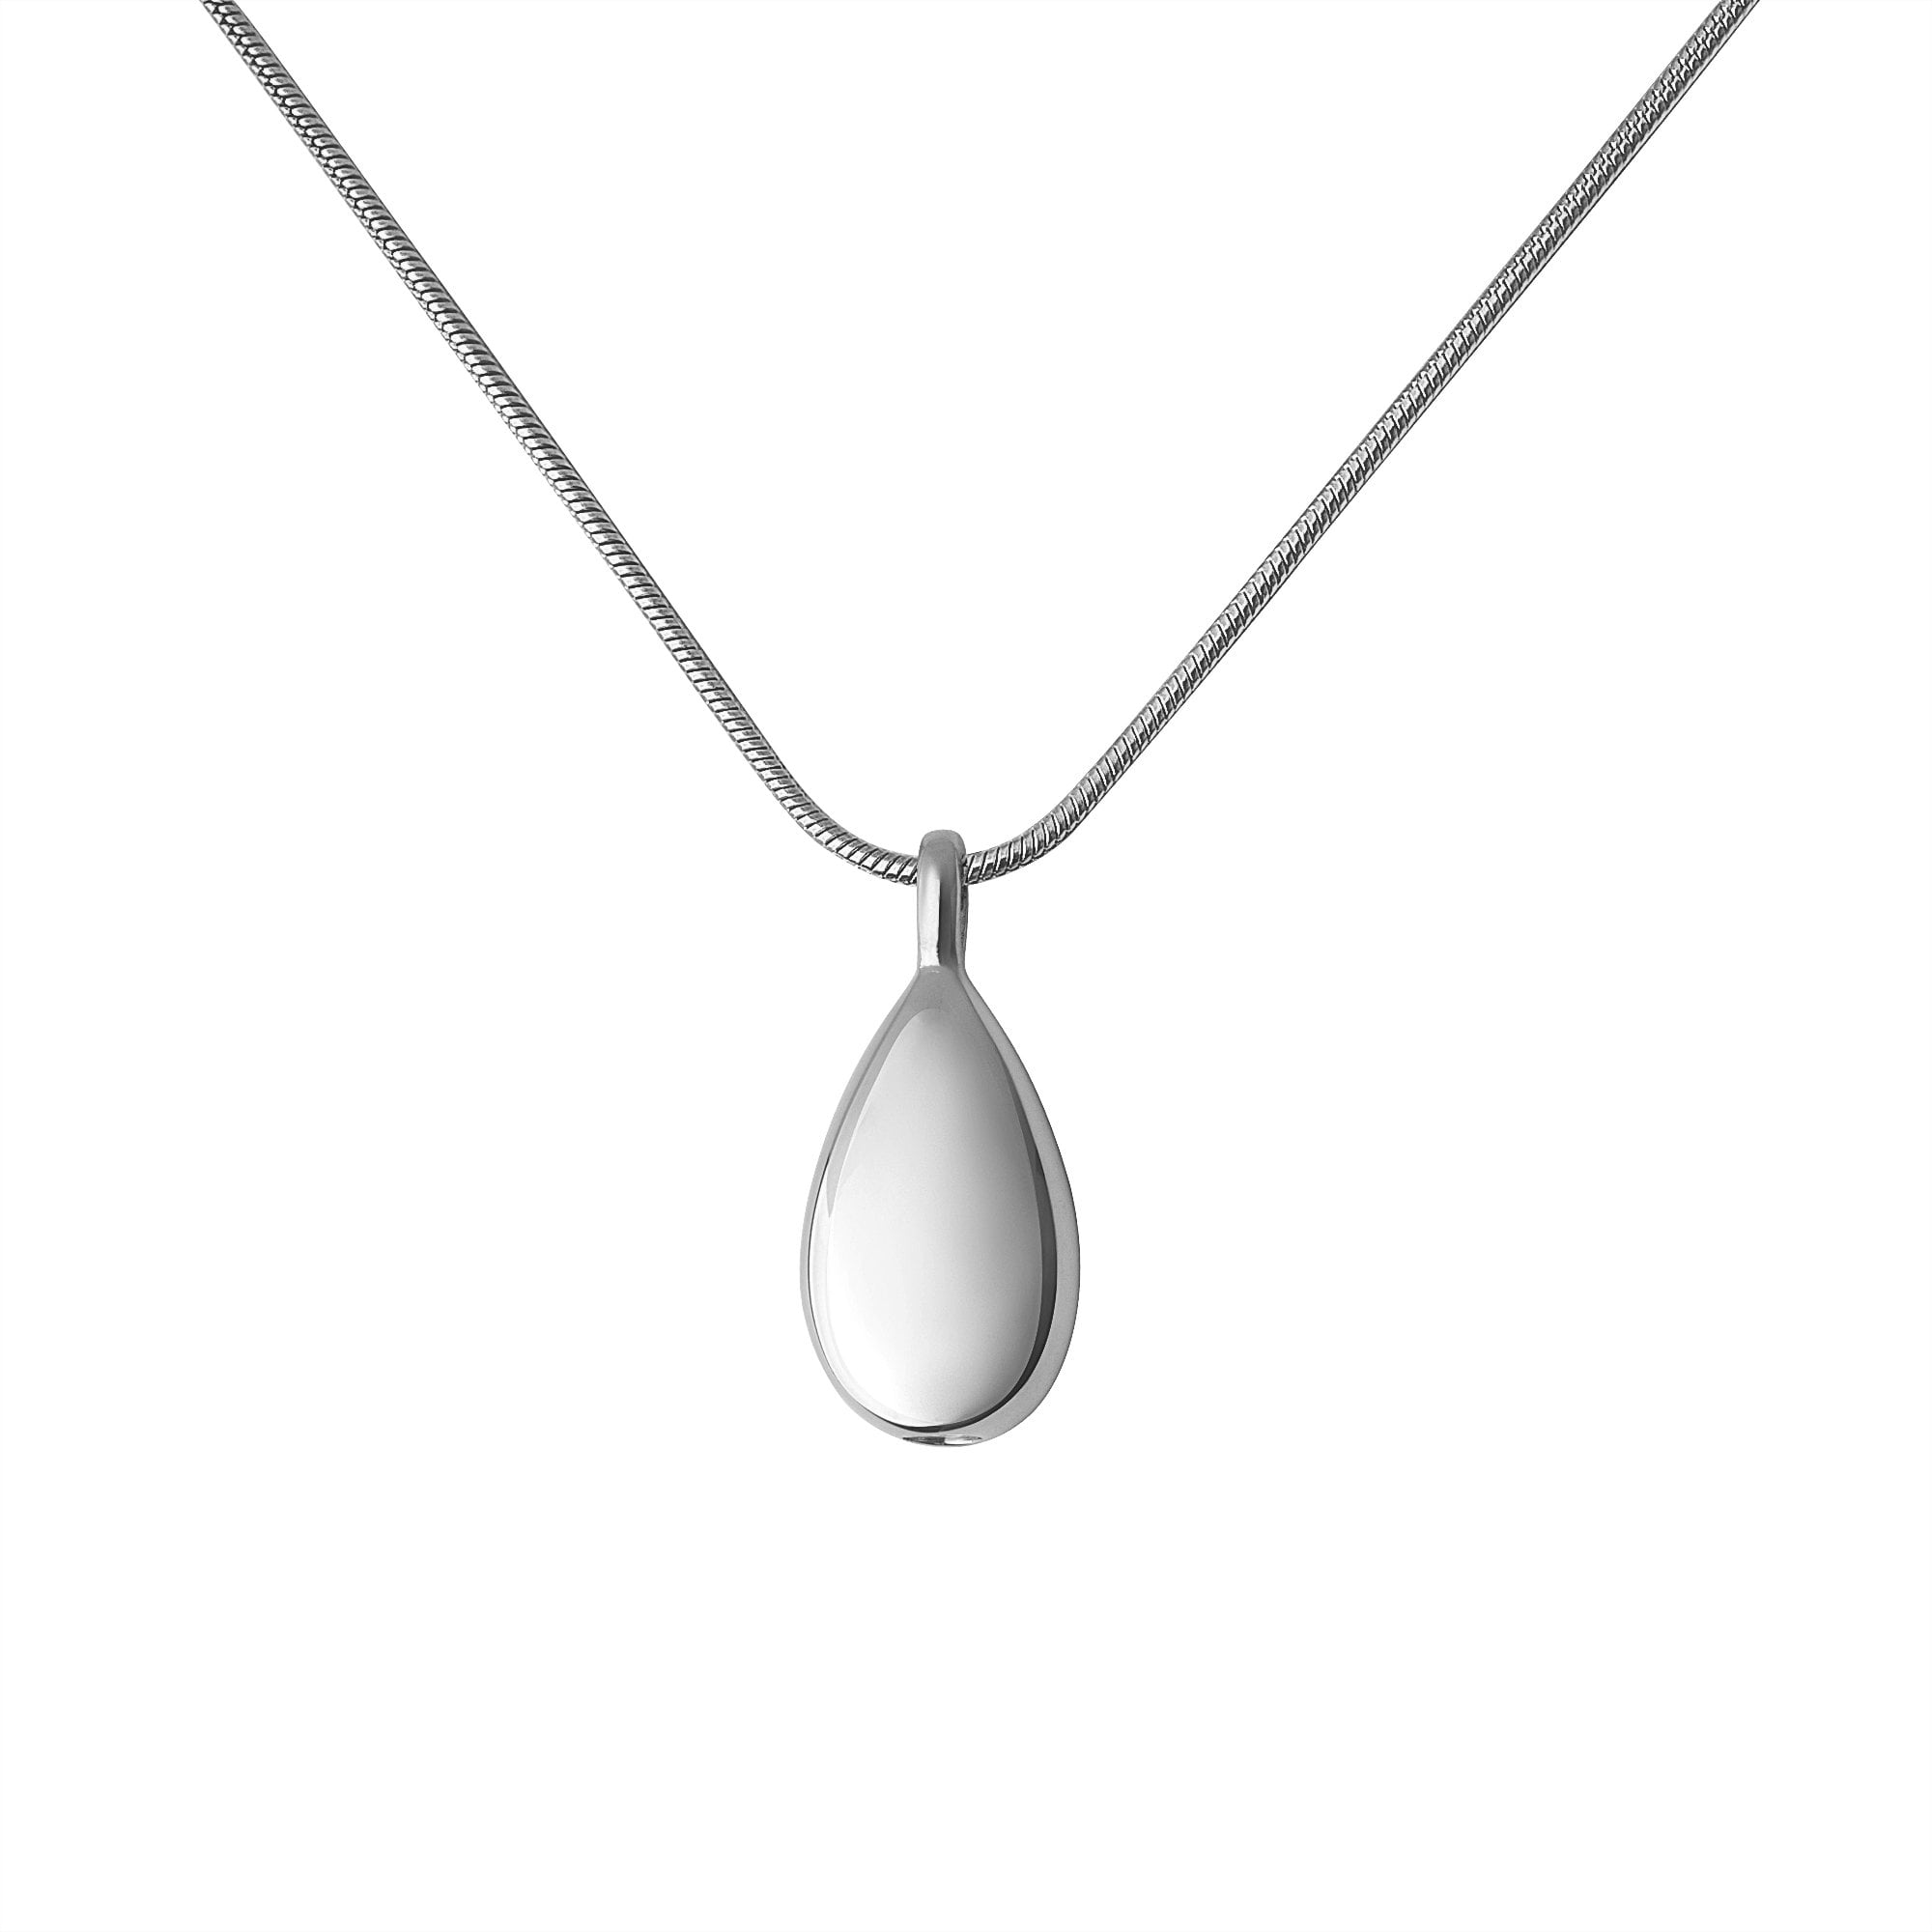 Silver Teardrop Pendant and Necklace for Ashes. Cremation Memorial keepsake 